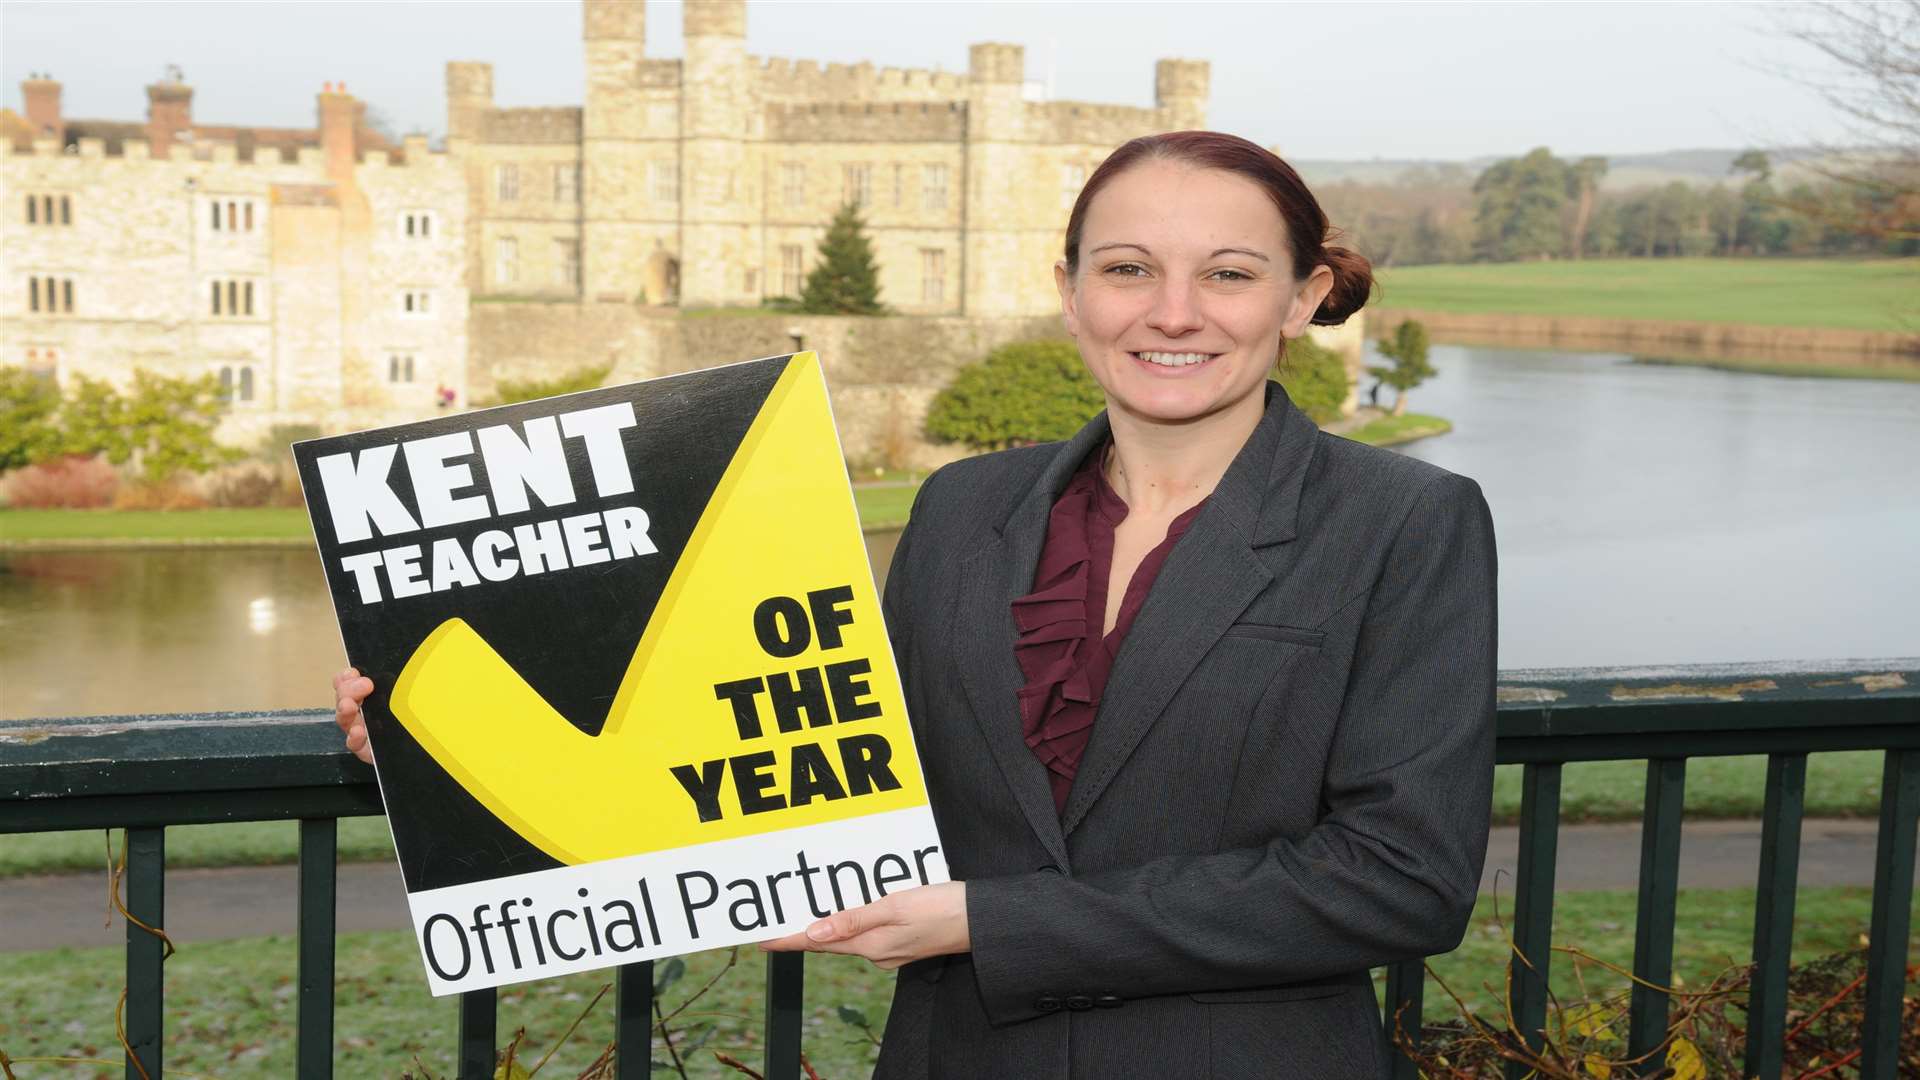 Amy Woods from Three R's Teacher Recruitment, pictured at Leeds Castle, is delighted to support the Kent Teacher of the Year Awards 2015.